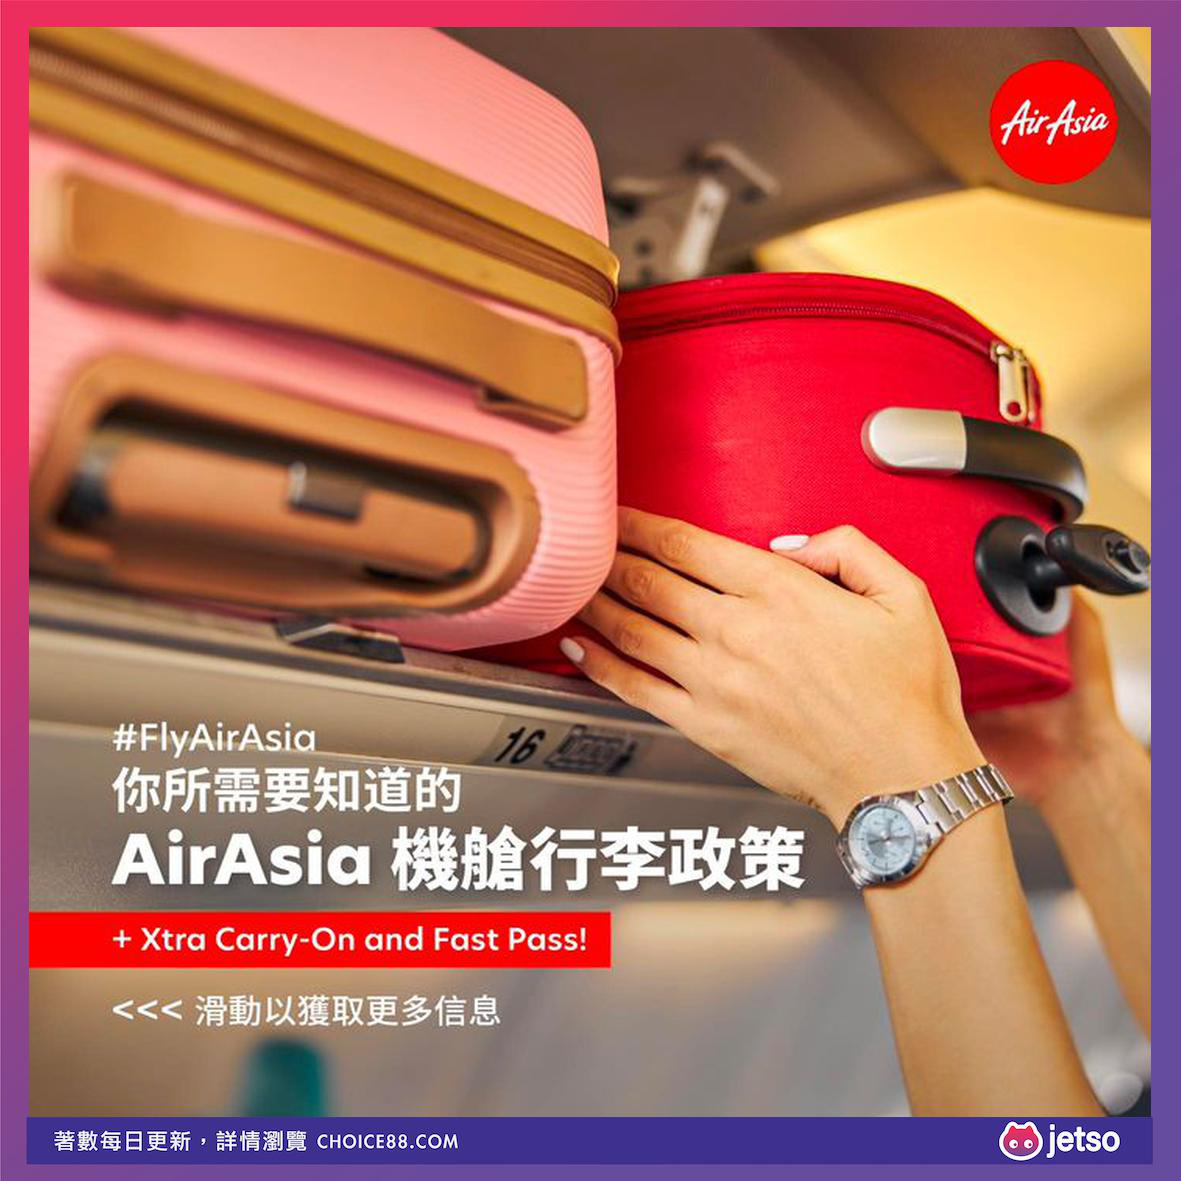 Air Asia : [机票优惠] AirAsia Xtra Carry-on and Fast Pass